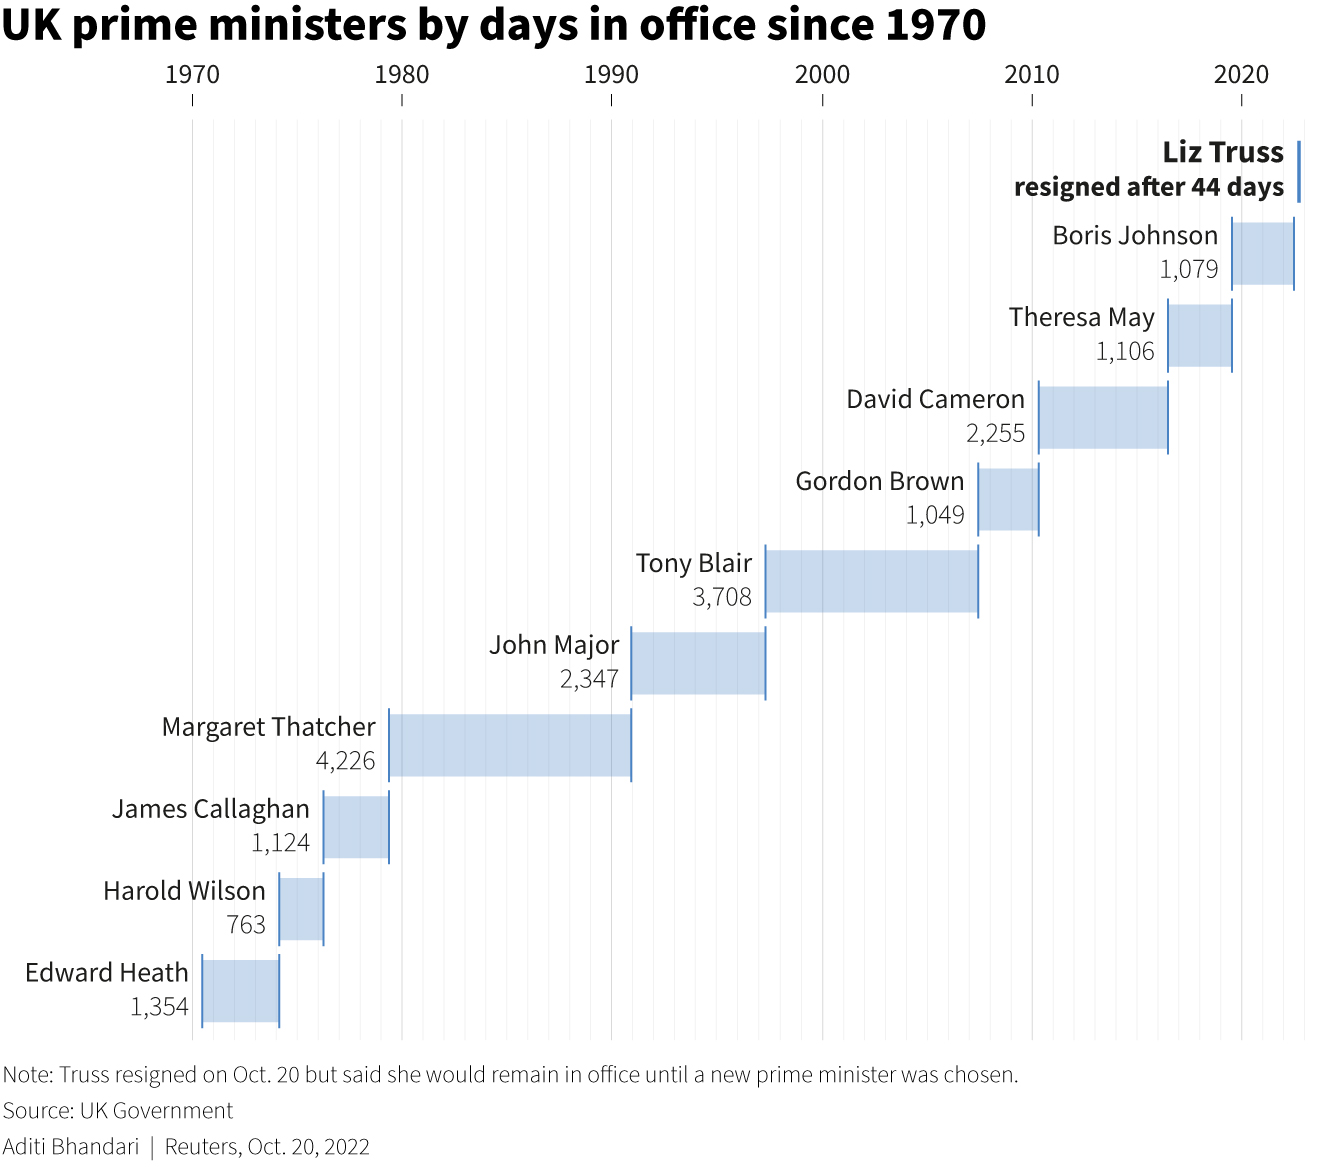 Bar chart showing the tenure lengths of British prime ministers since 1970.